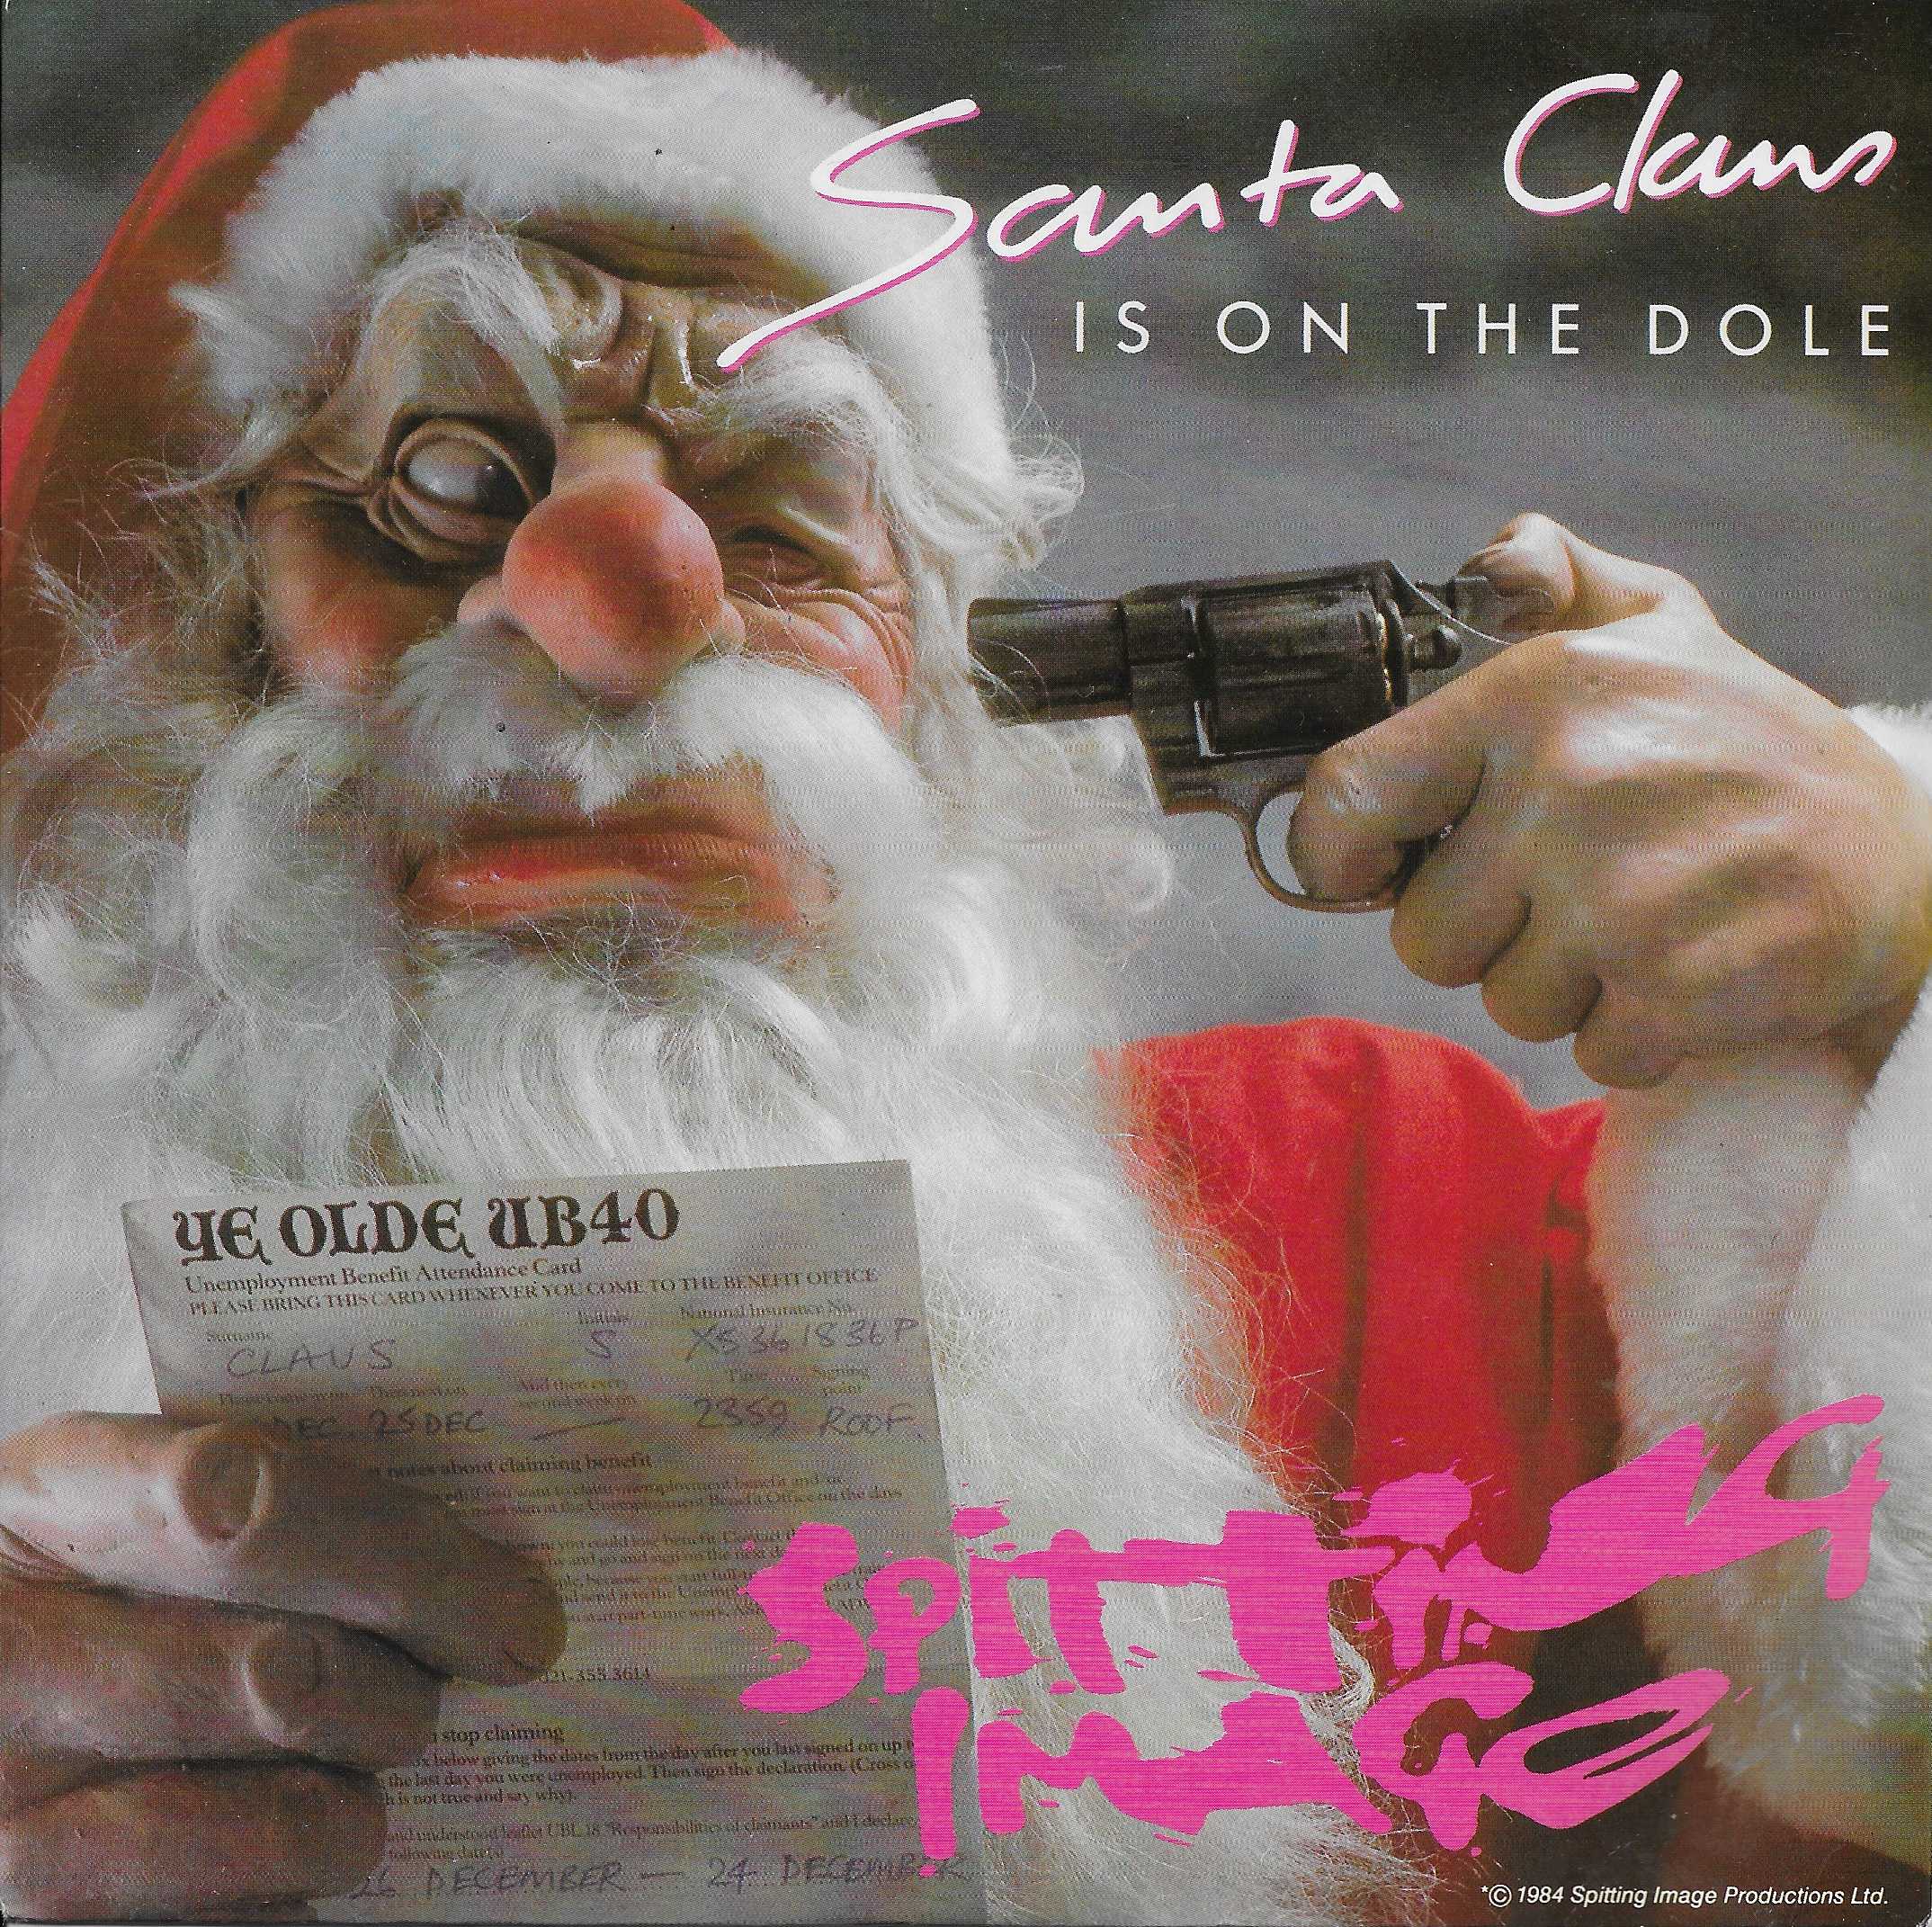 Picture of VS 921 Santa Claus is on the dole (Spitting Image) by artist Pope / Grant / Naylor from ITV, Channel 4 and Channel 5 singles library